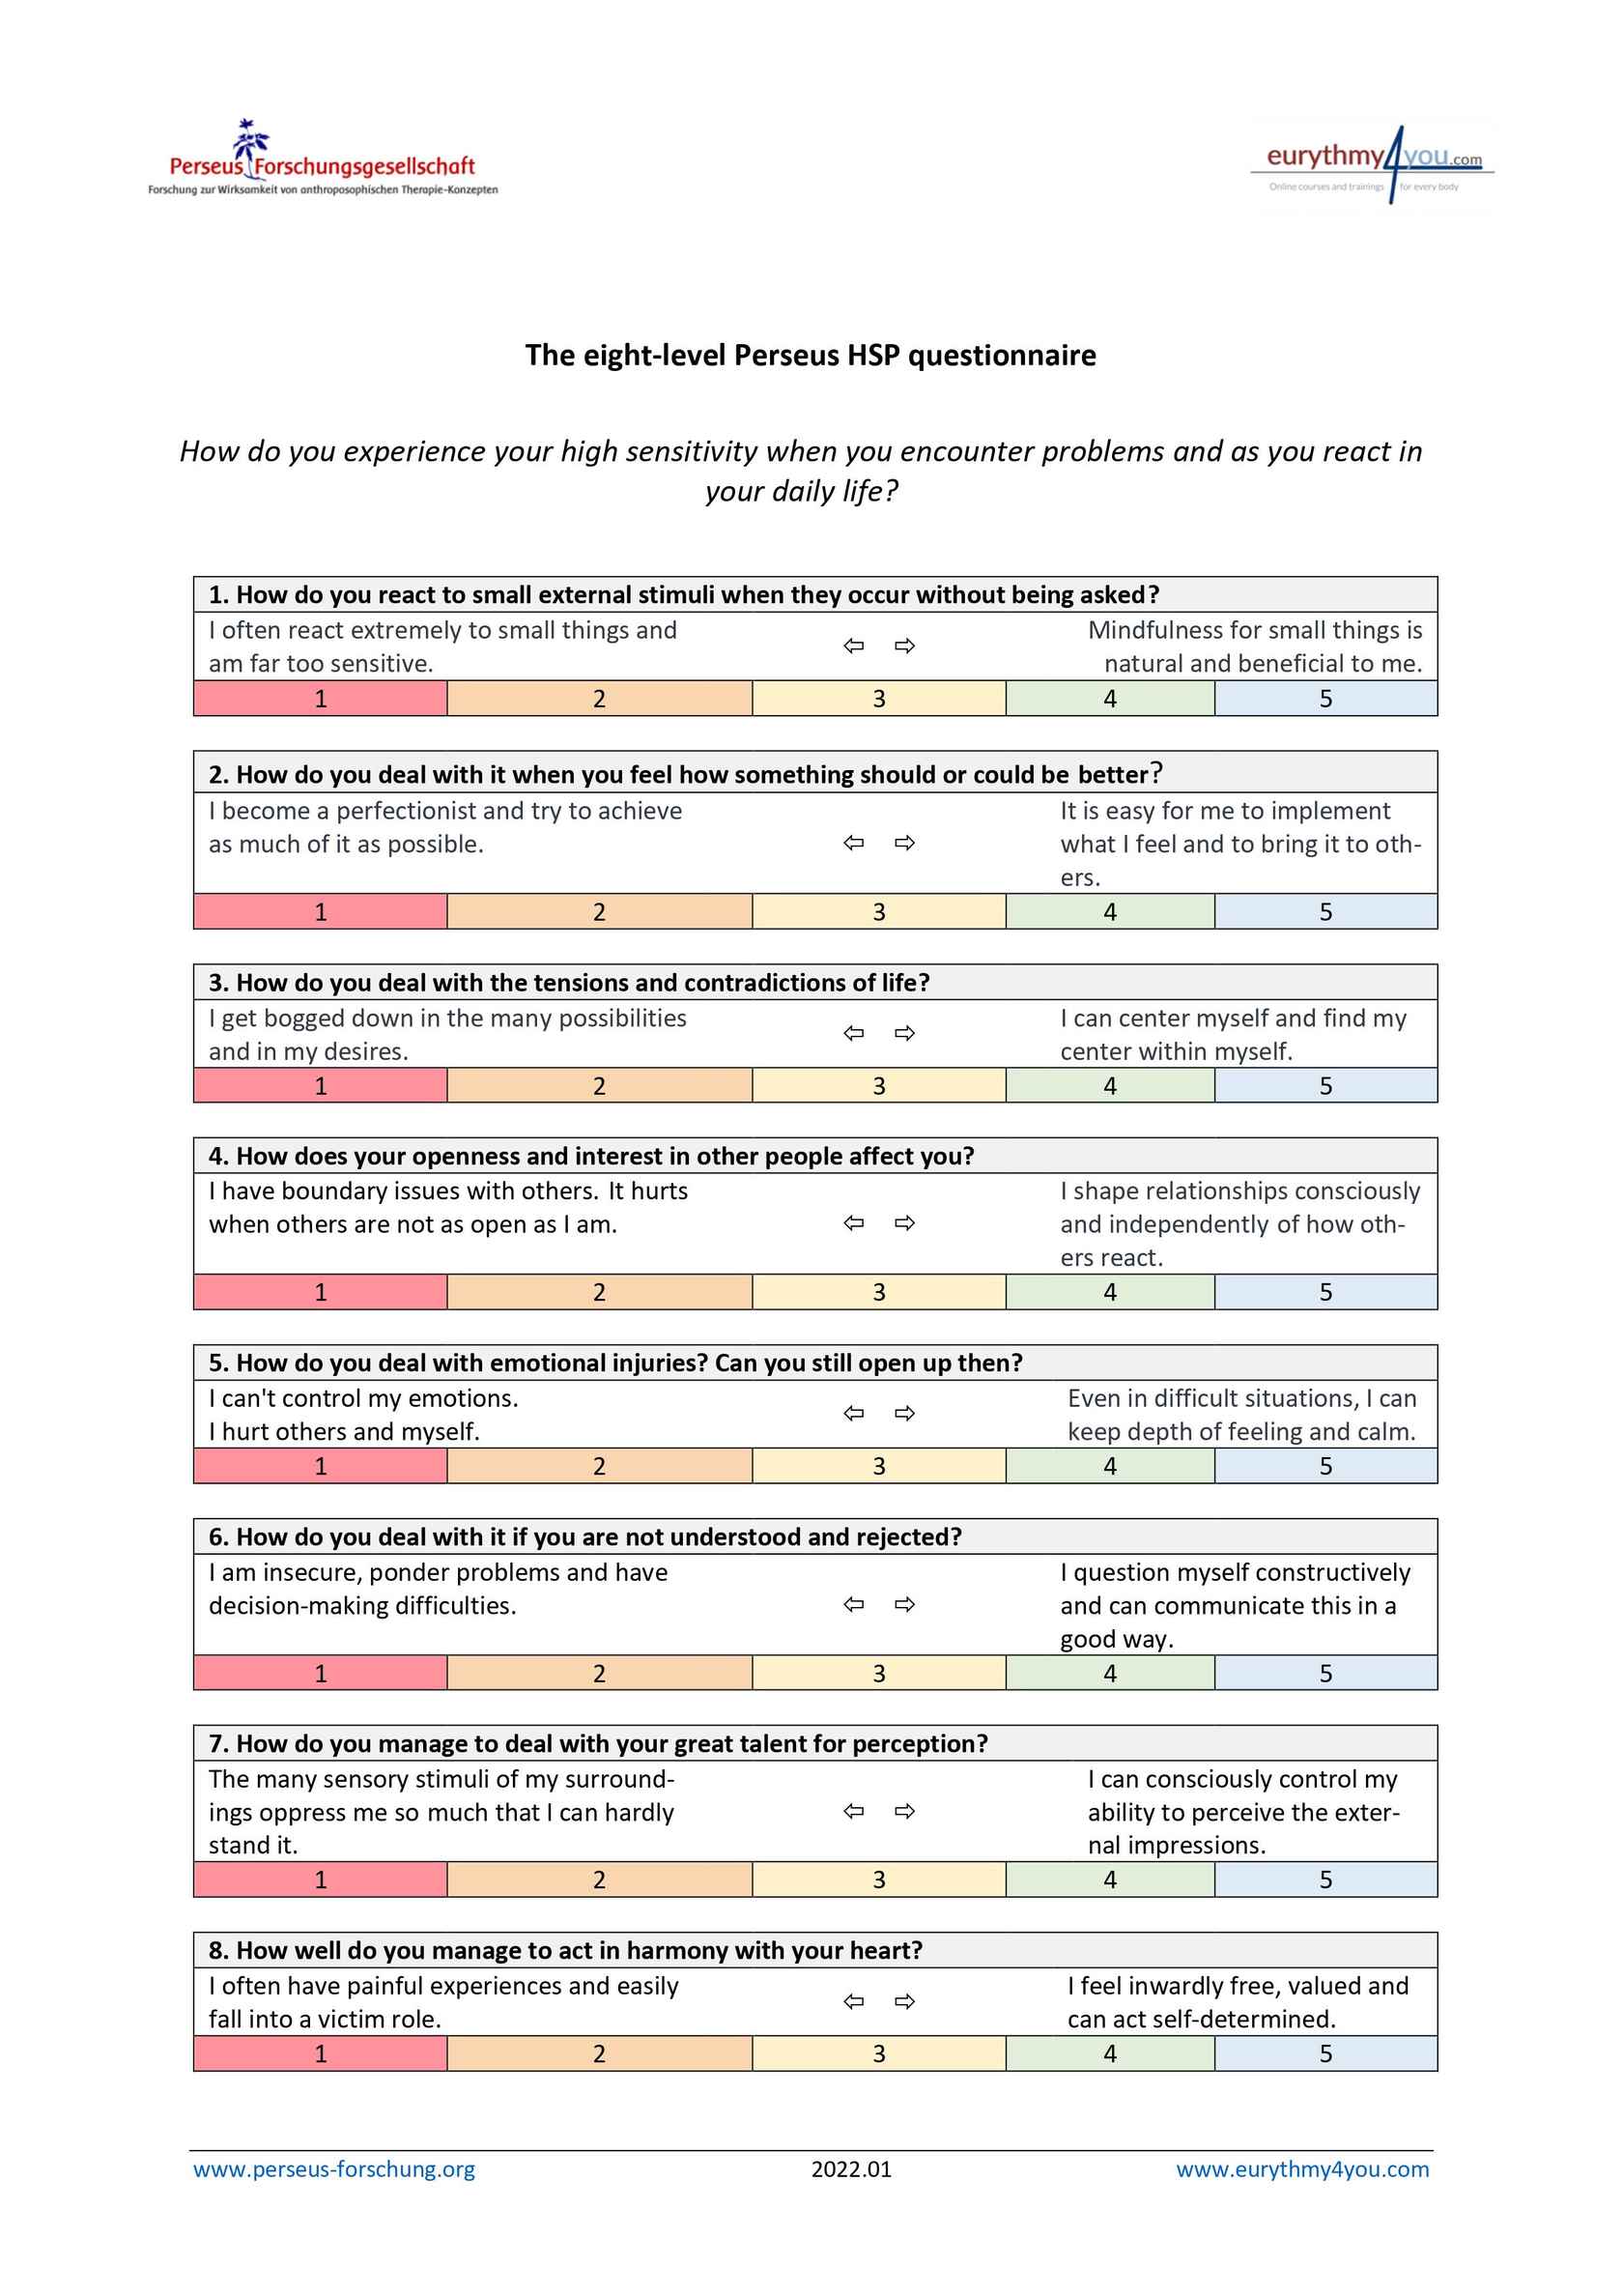 The eight-level Perseus HSP Questionnaire 2022.01